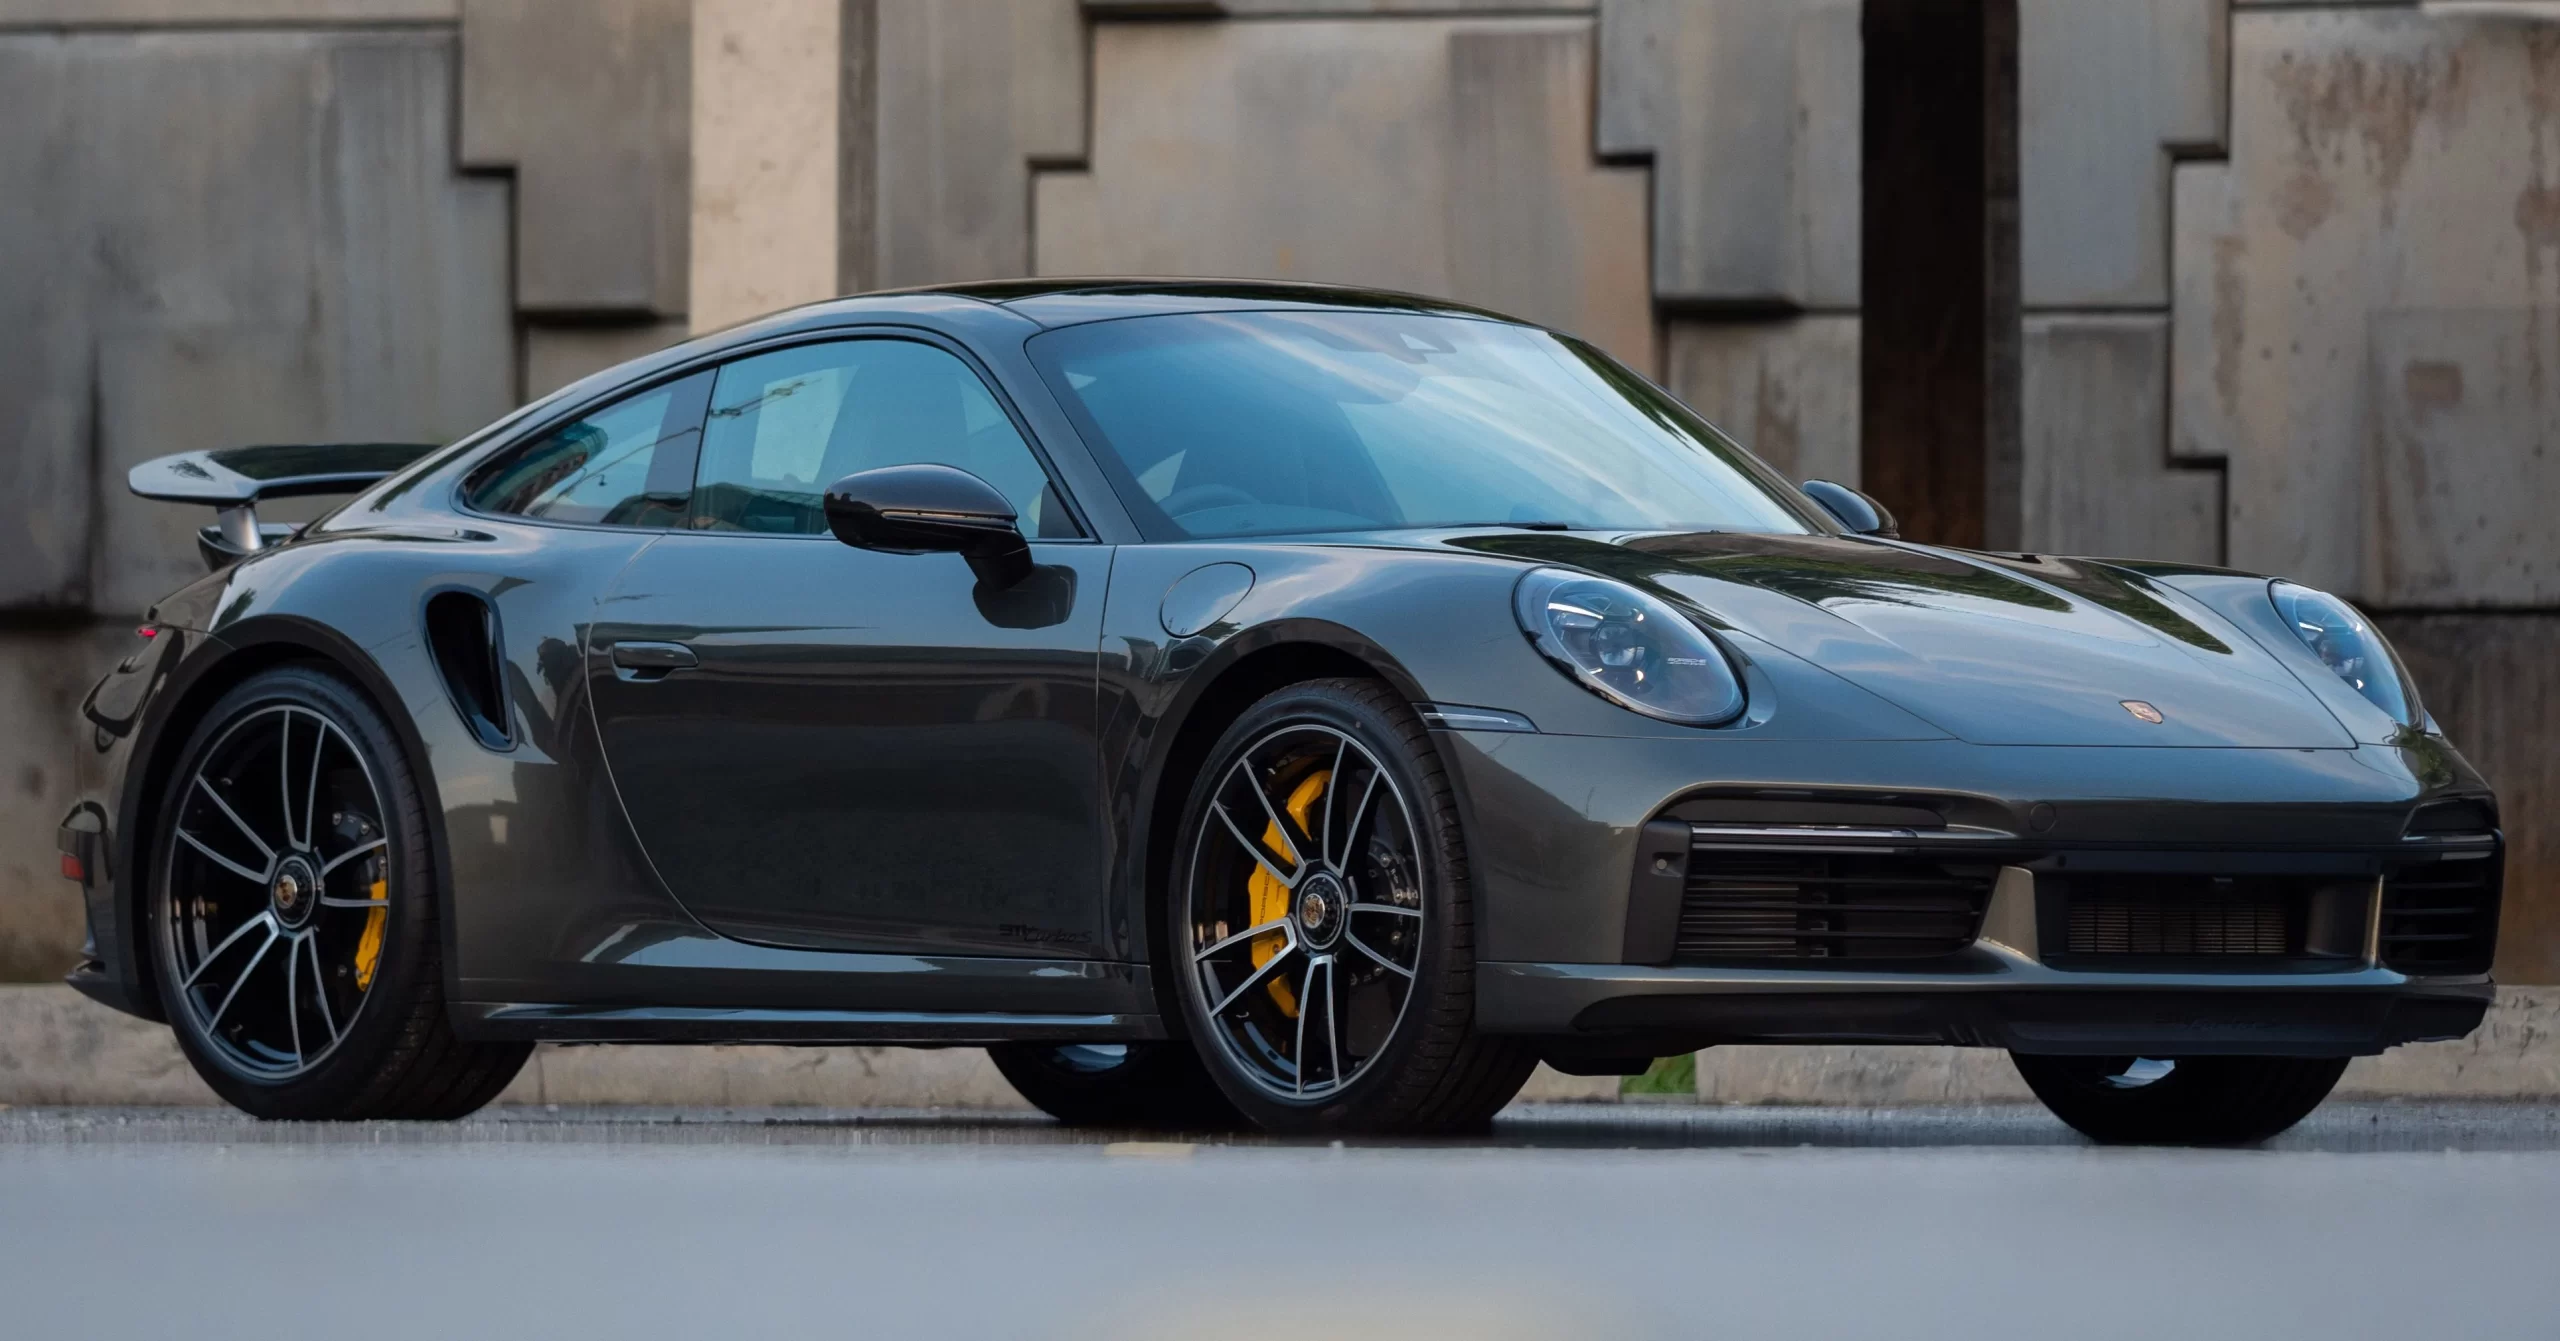 Used Porsche 911 Turbo S For Sale - AIR TRAIN NOW